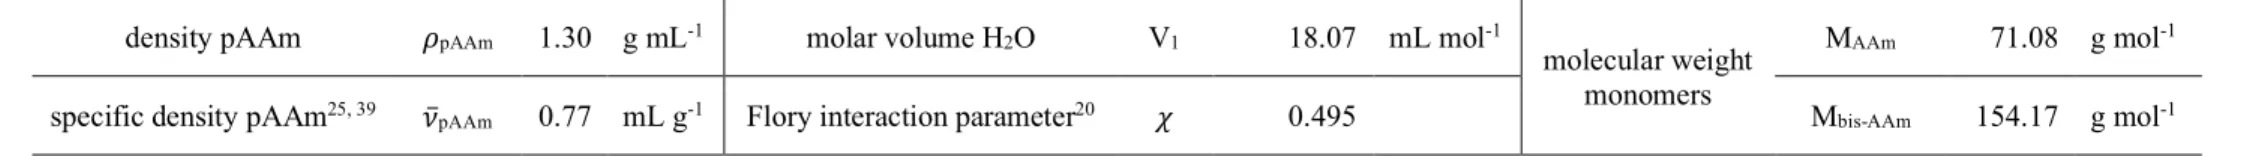 Table 3.III.3: Material-specific parameters used for calculations in this work.  